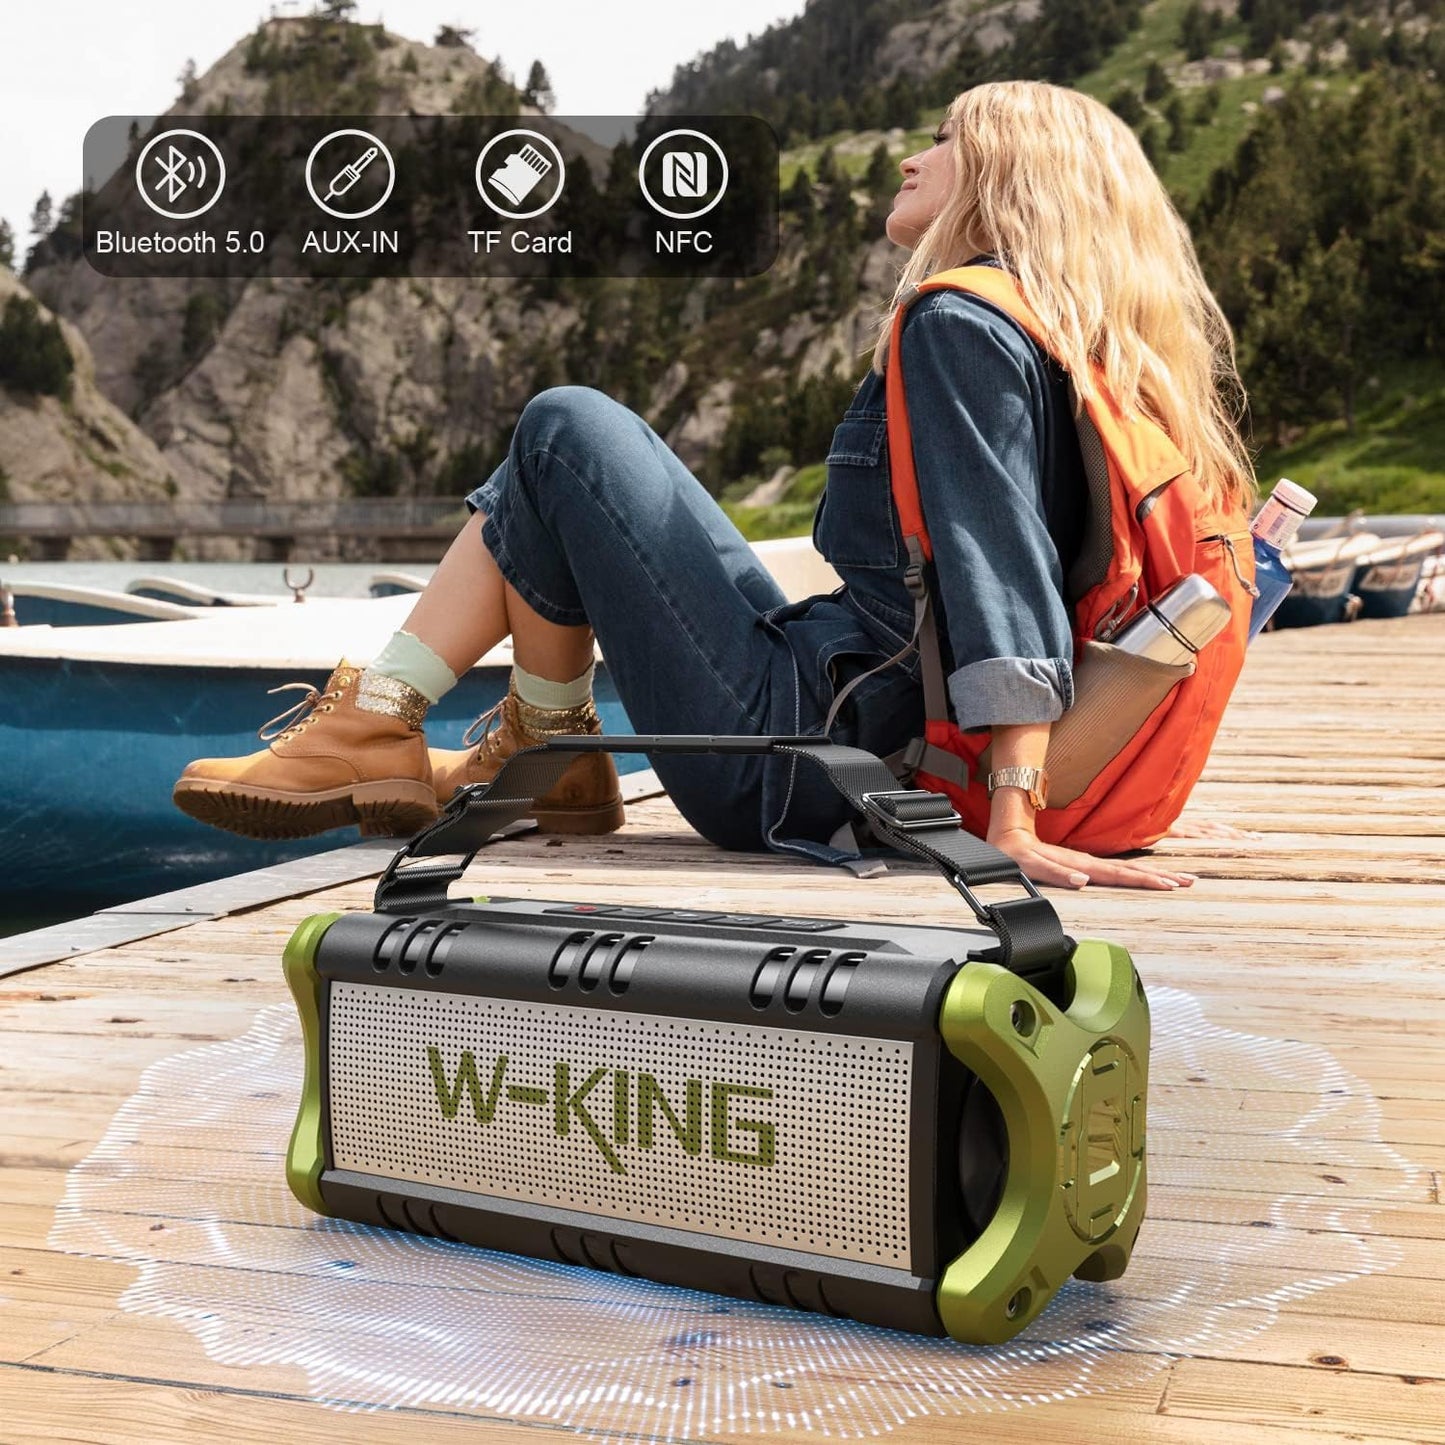 W-KING Bluetooth Speaker, 50W Portable Speakers Bluetooth Wireless Loud, IPX6 Waterproof Outdoor Large Bluetooth Speaker Subwoofer/Bass Boost/DSP/40H Playtime/Stereo Pairing/Power Bank/TF/Hands-Free